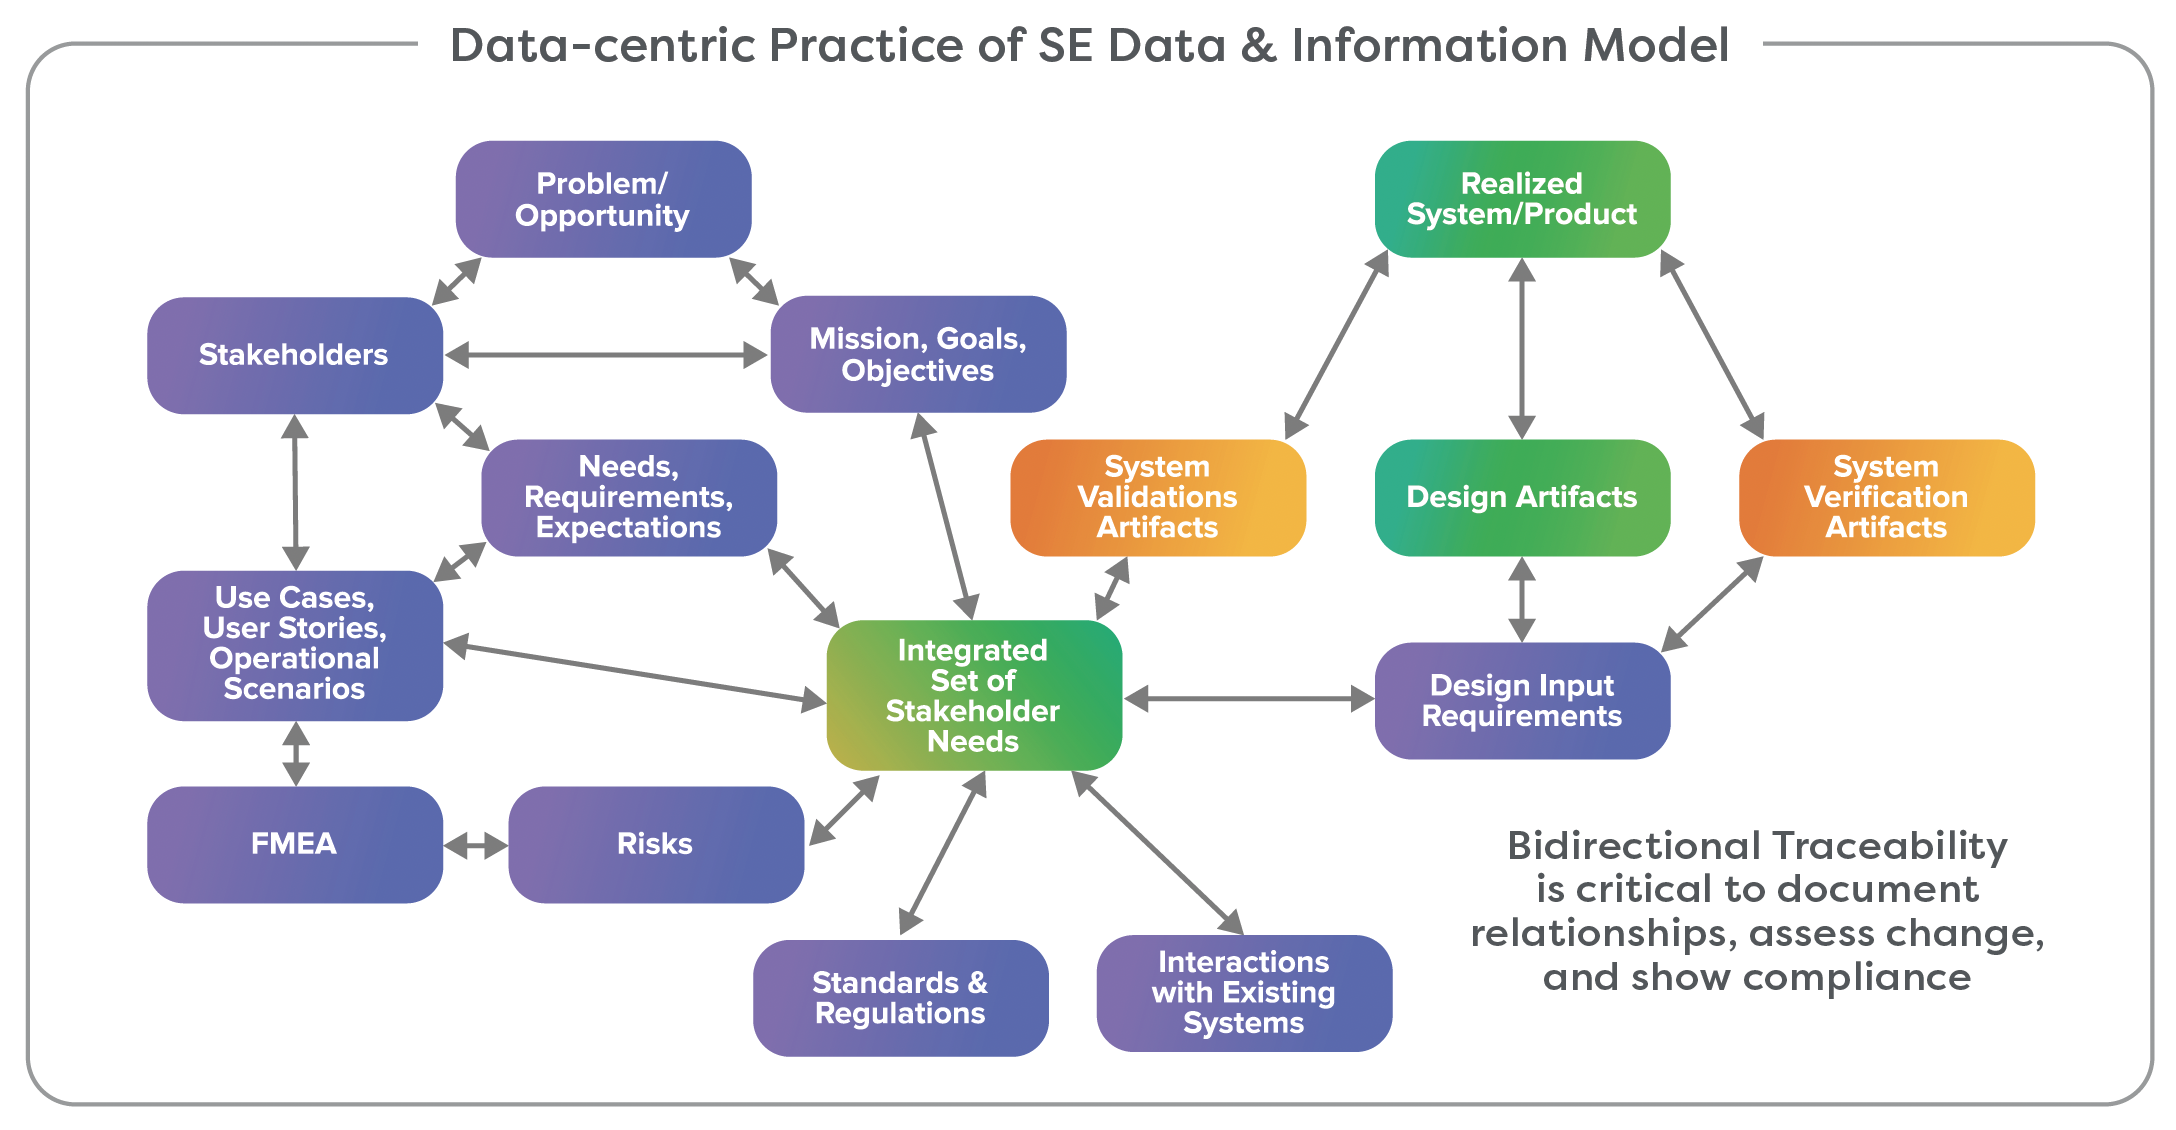 MBSE Information Model Showing Data Centric Practice of SE Data Information